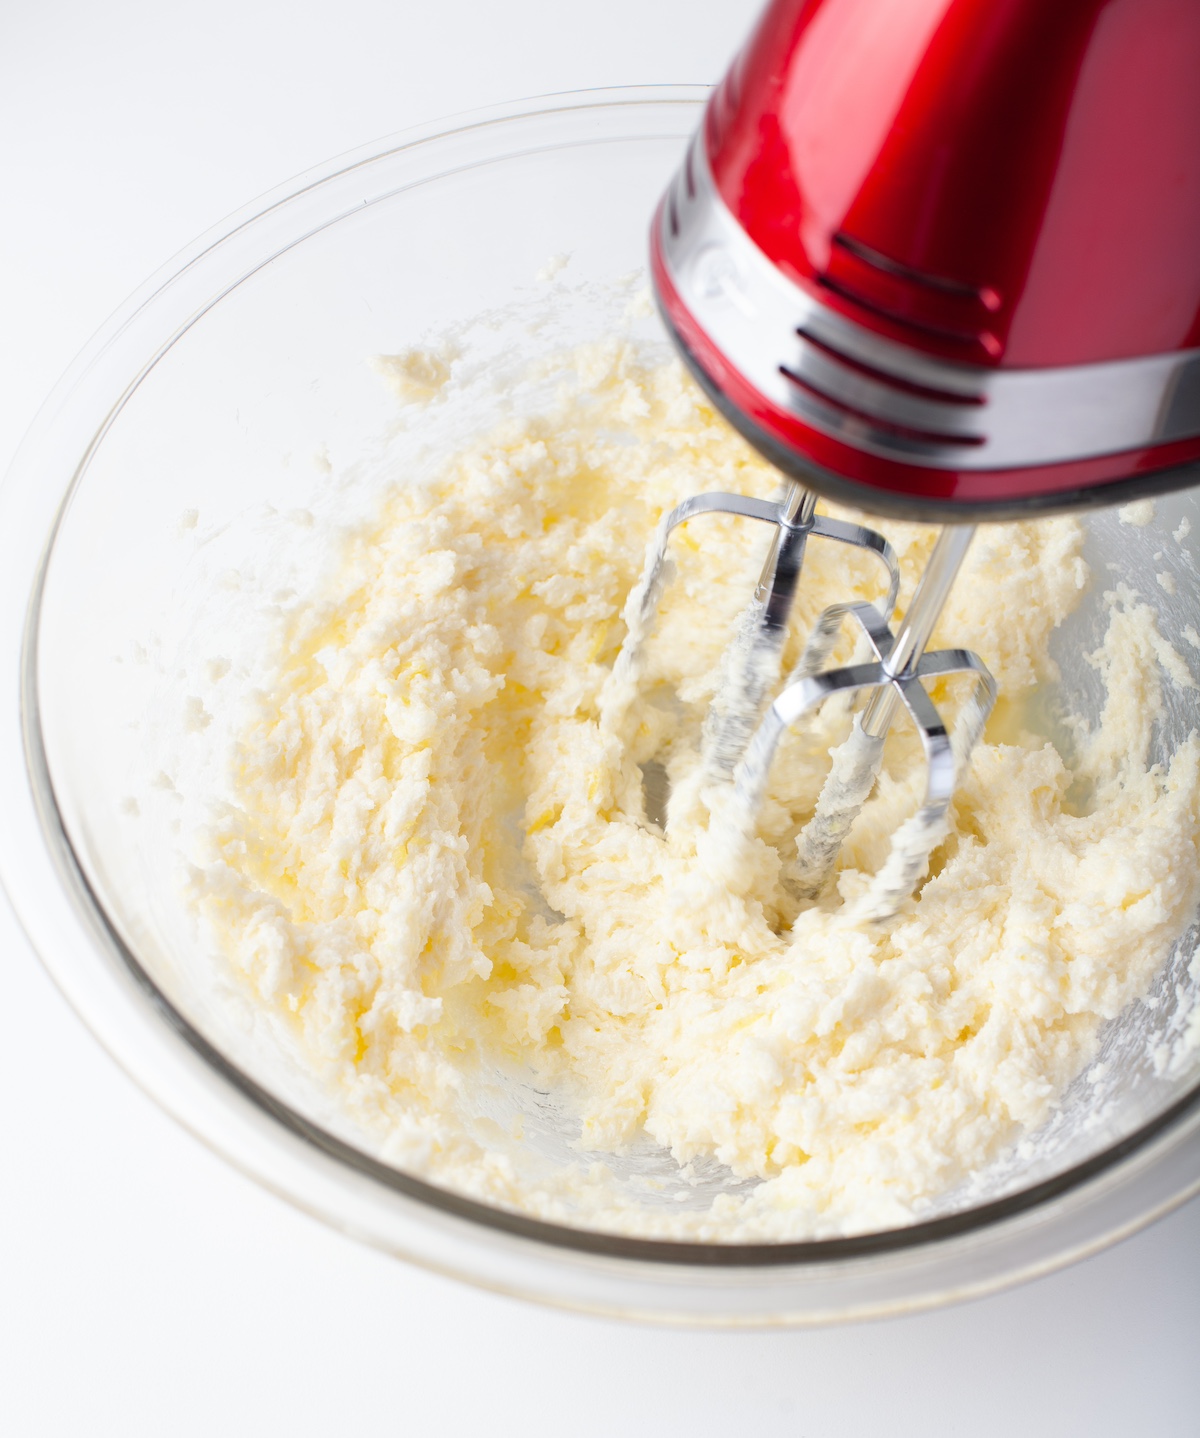 Creaming together butter and sugar in a glass bowl with a red mixer